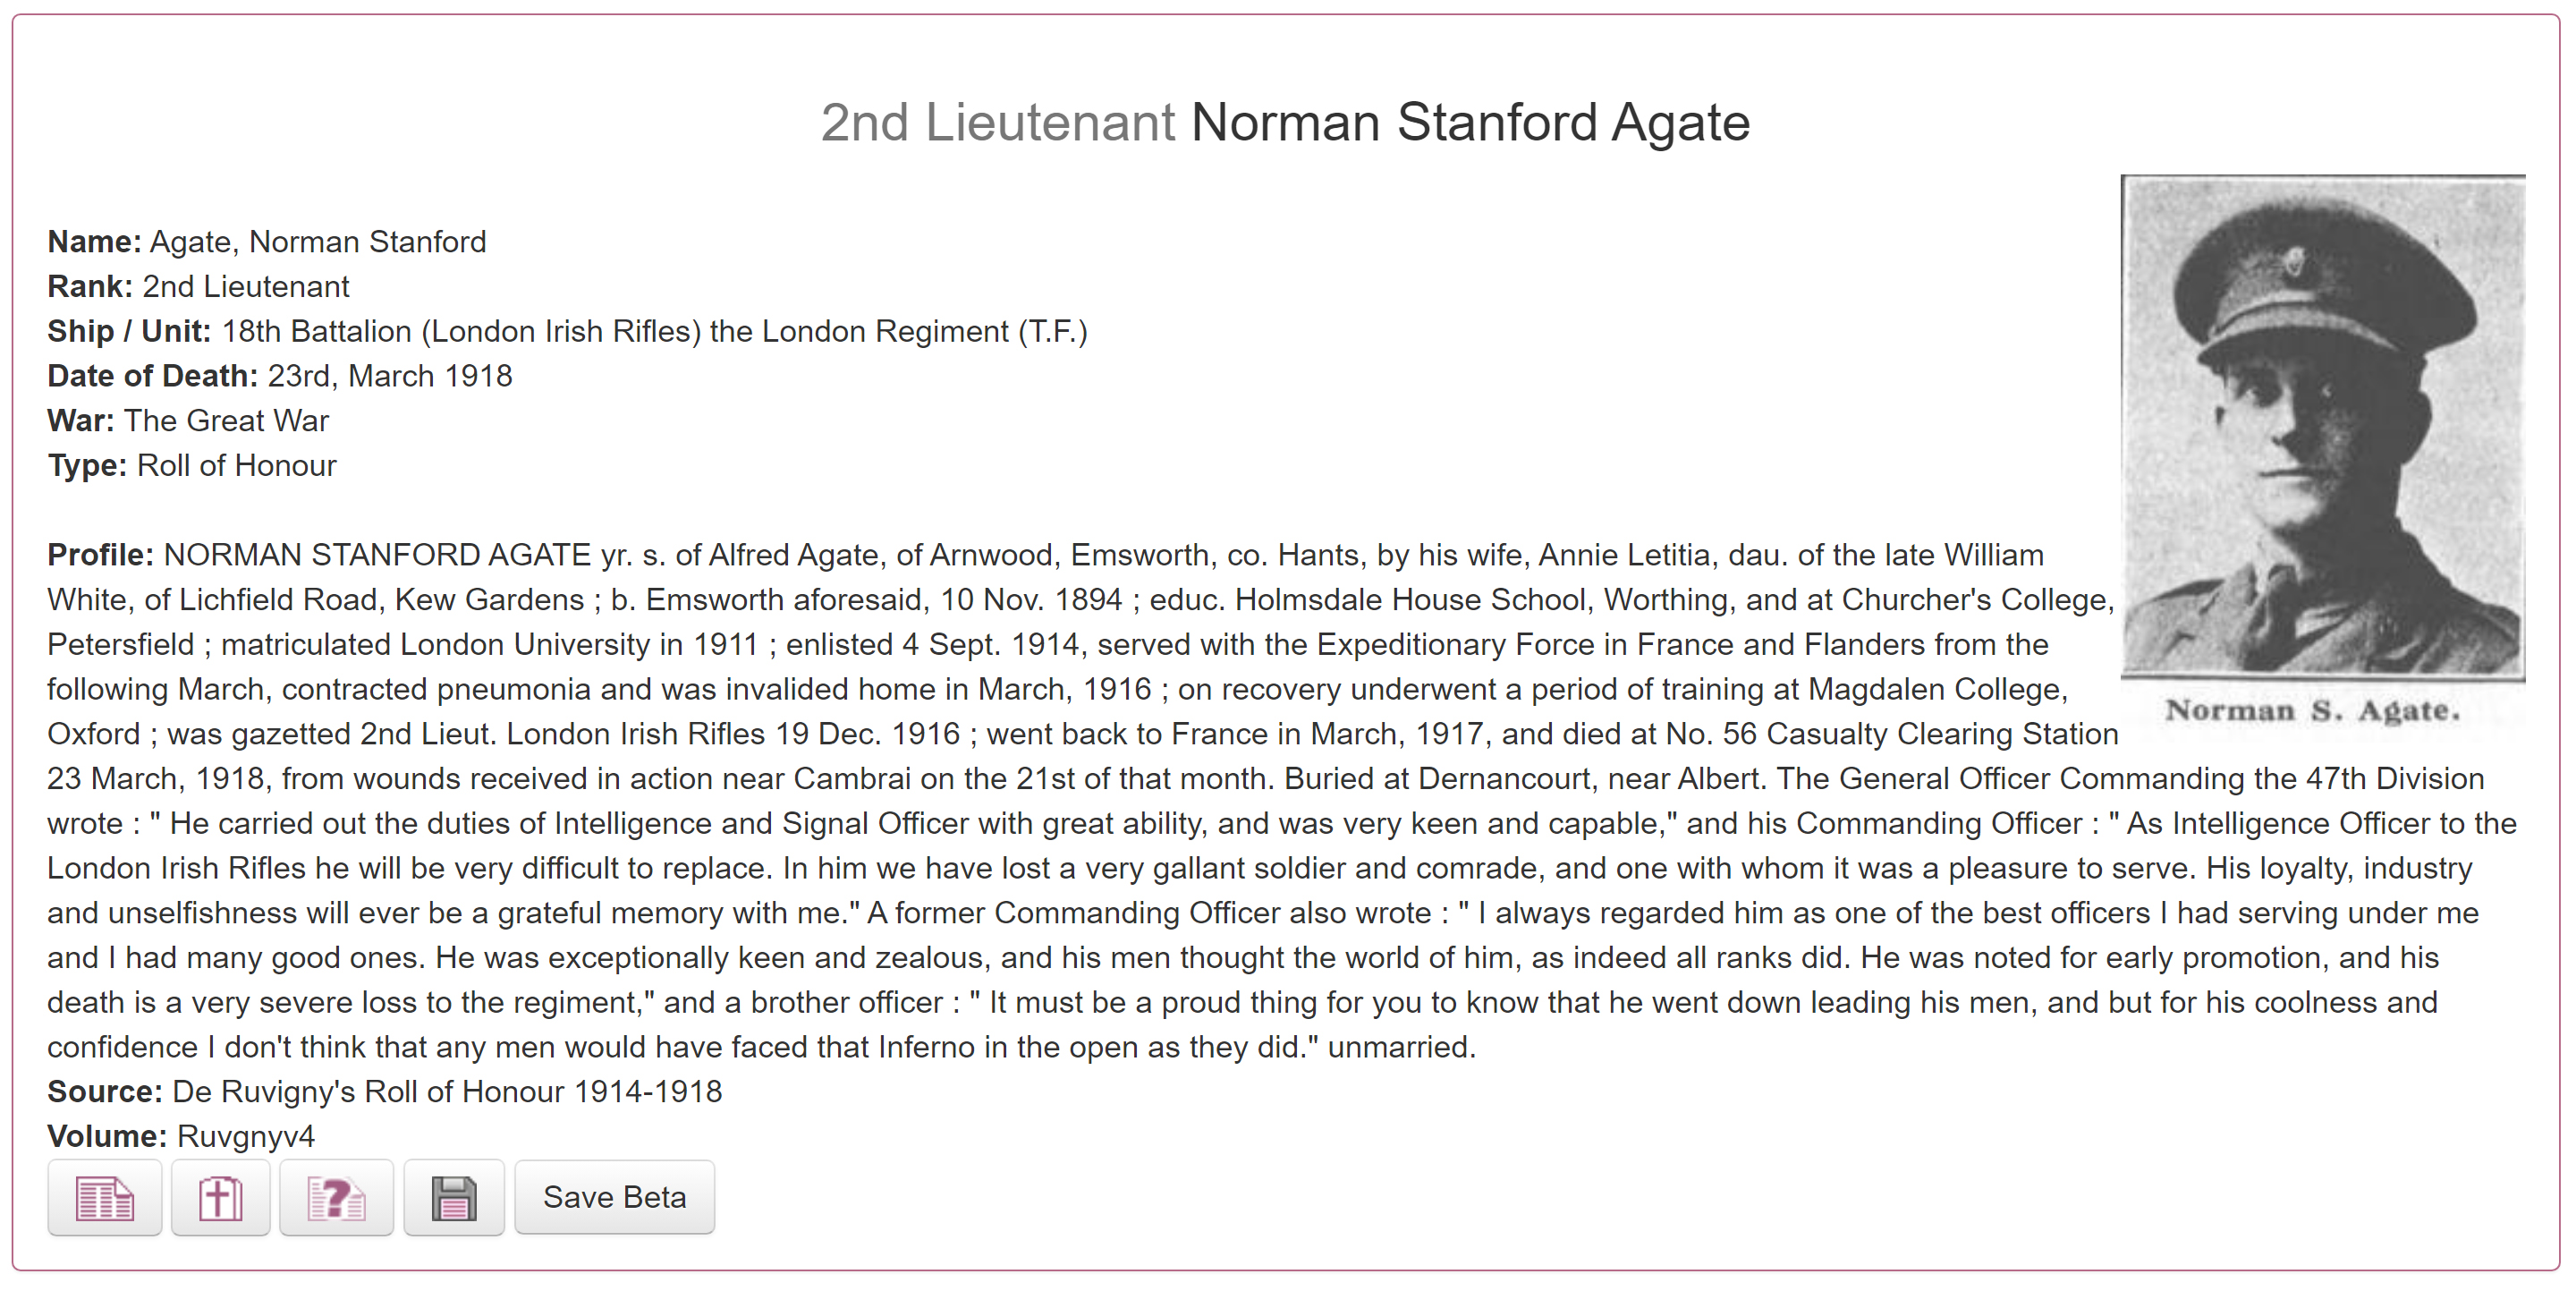 Norman Agate's Roll of Honour record on TheGenealogist.co.uk